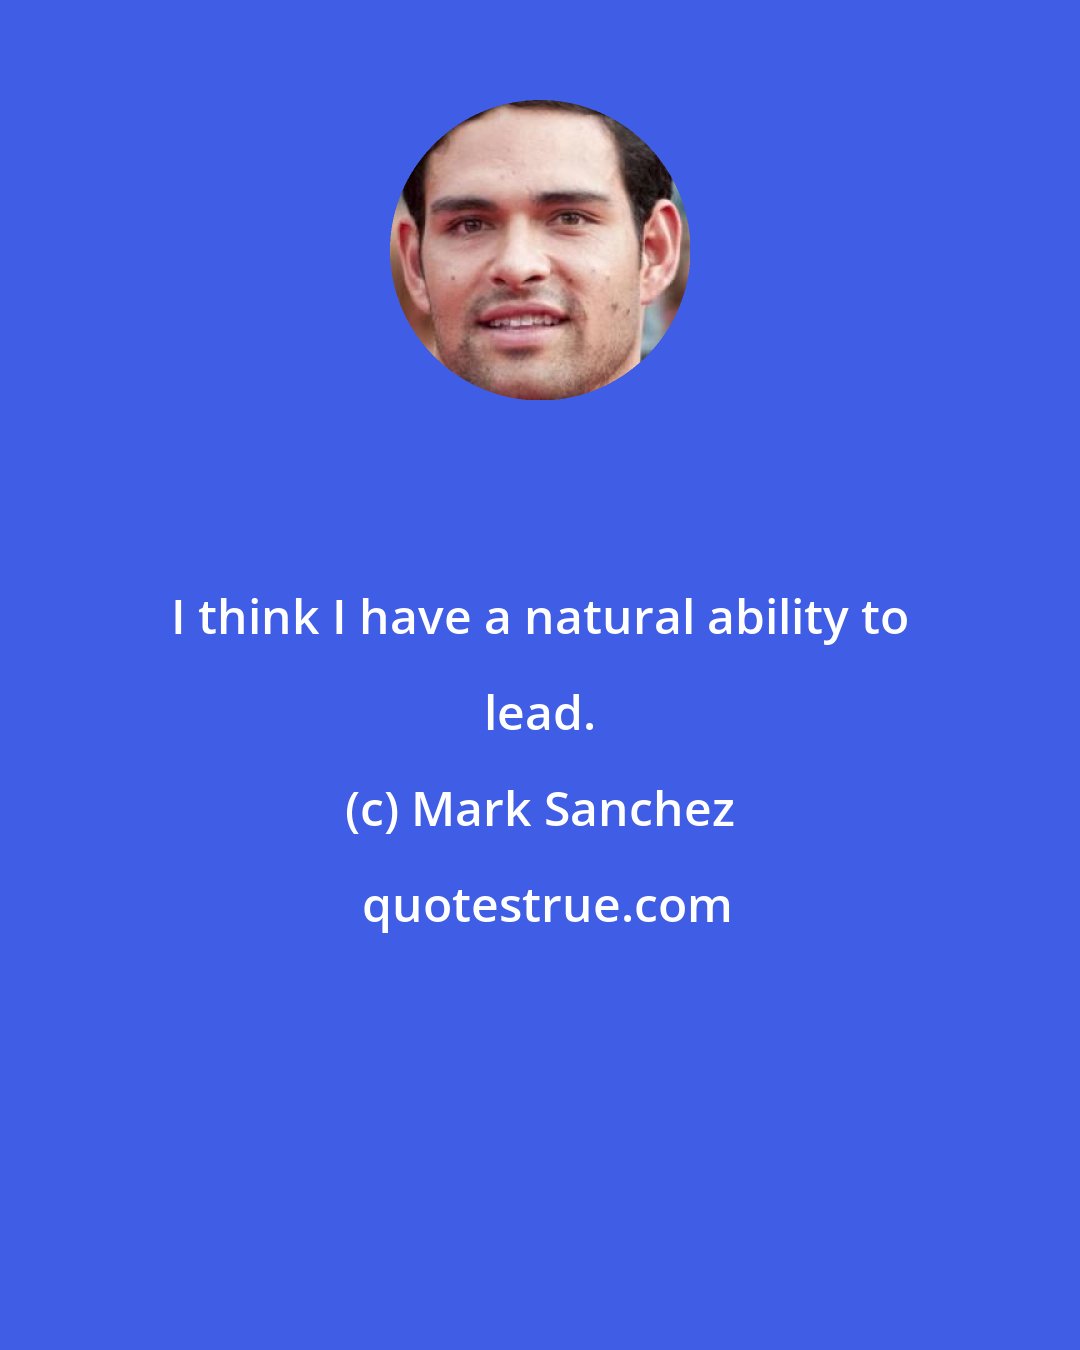 Mark Sanchez: I think I have a natural ability to lead.